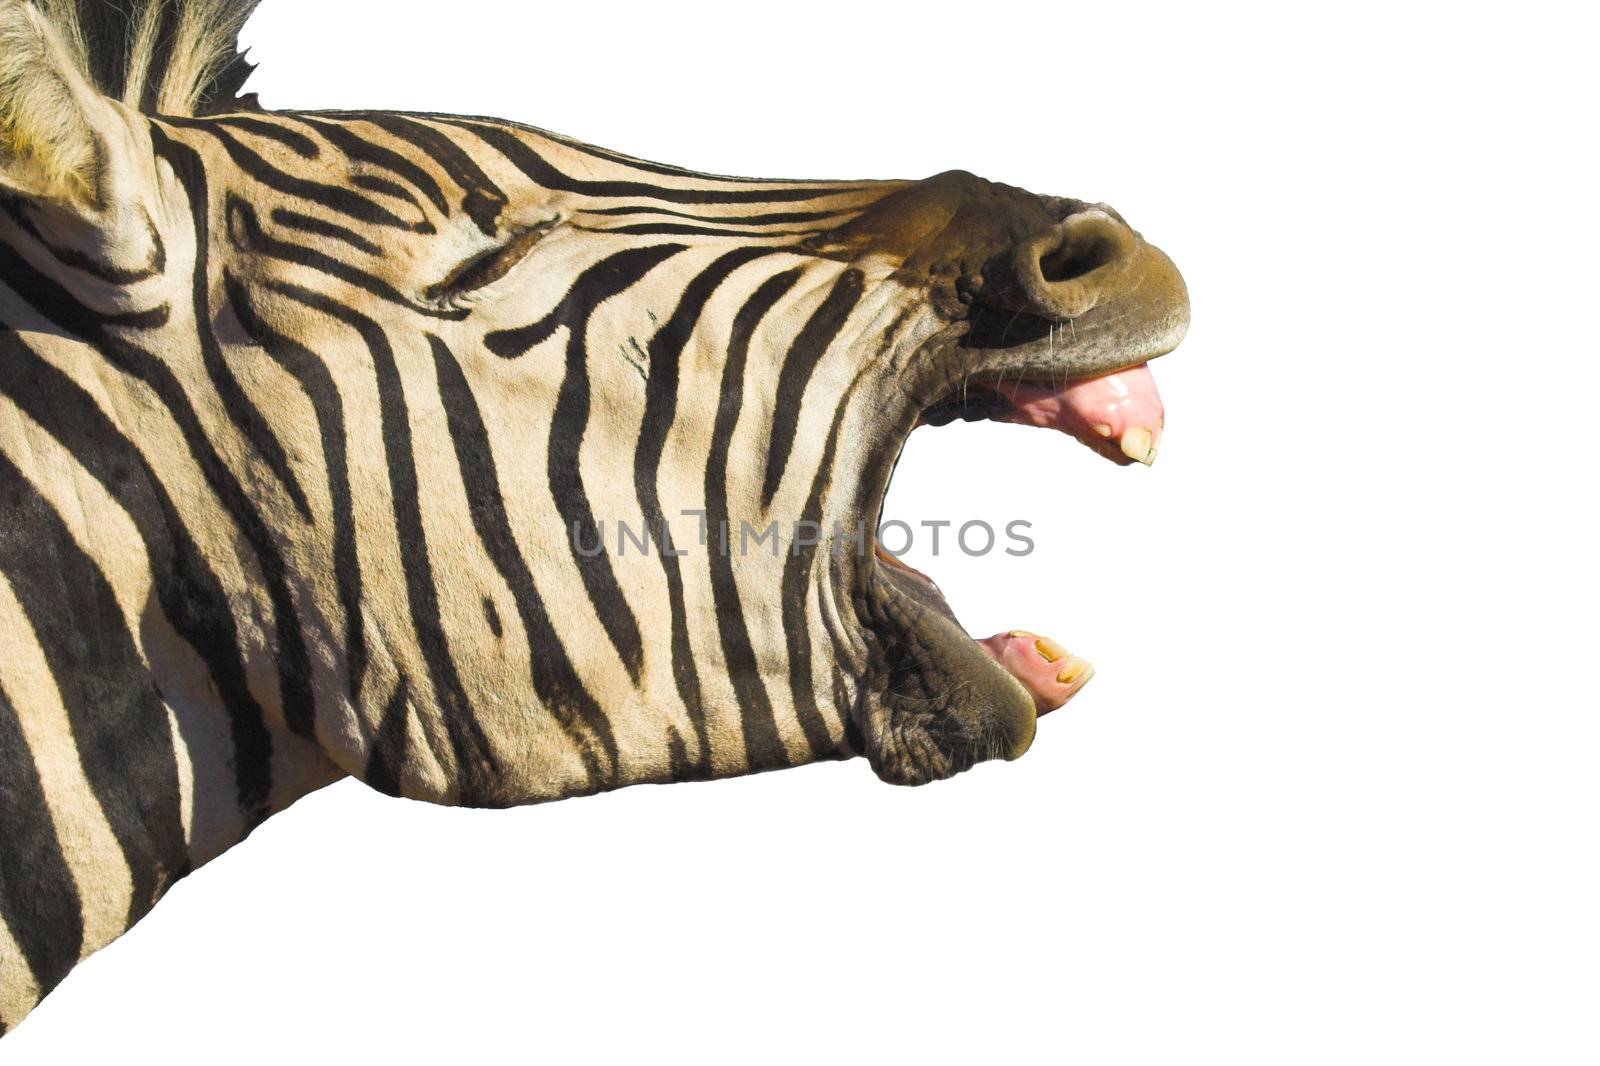 Zebra yawning with its mouth wide open, isolated on white. Good shot for dental projects